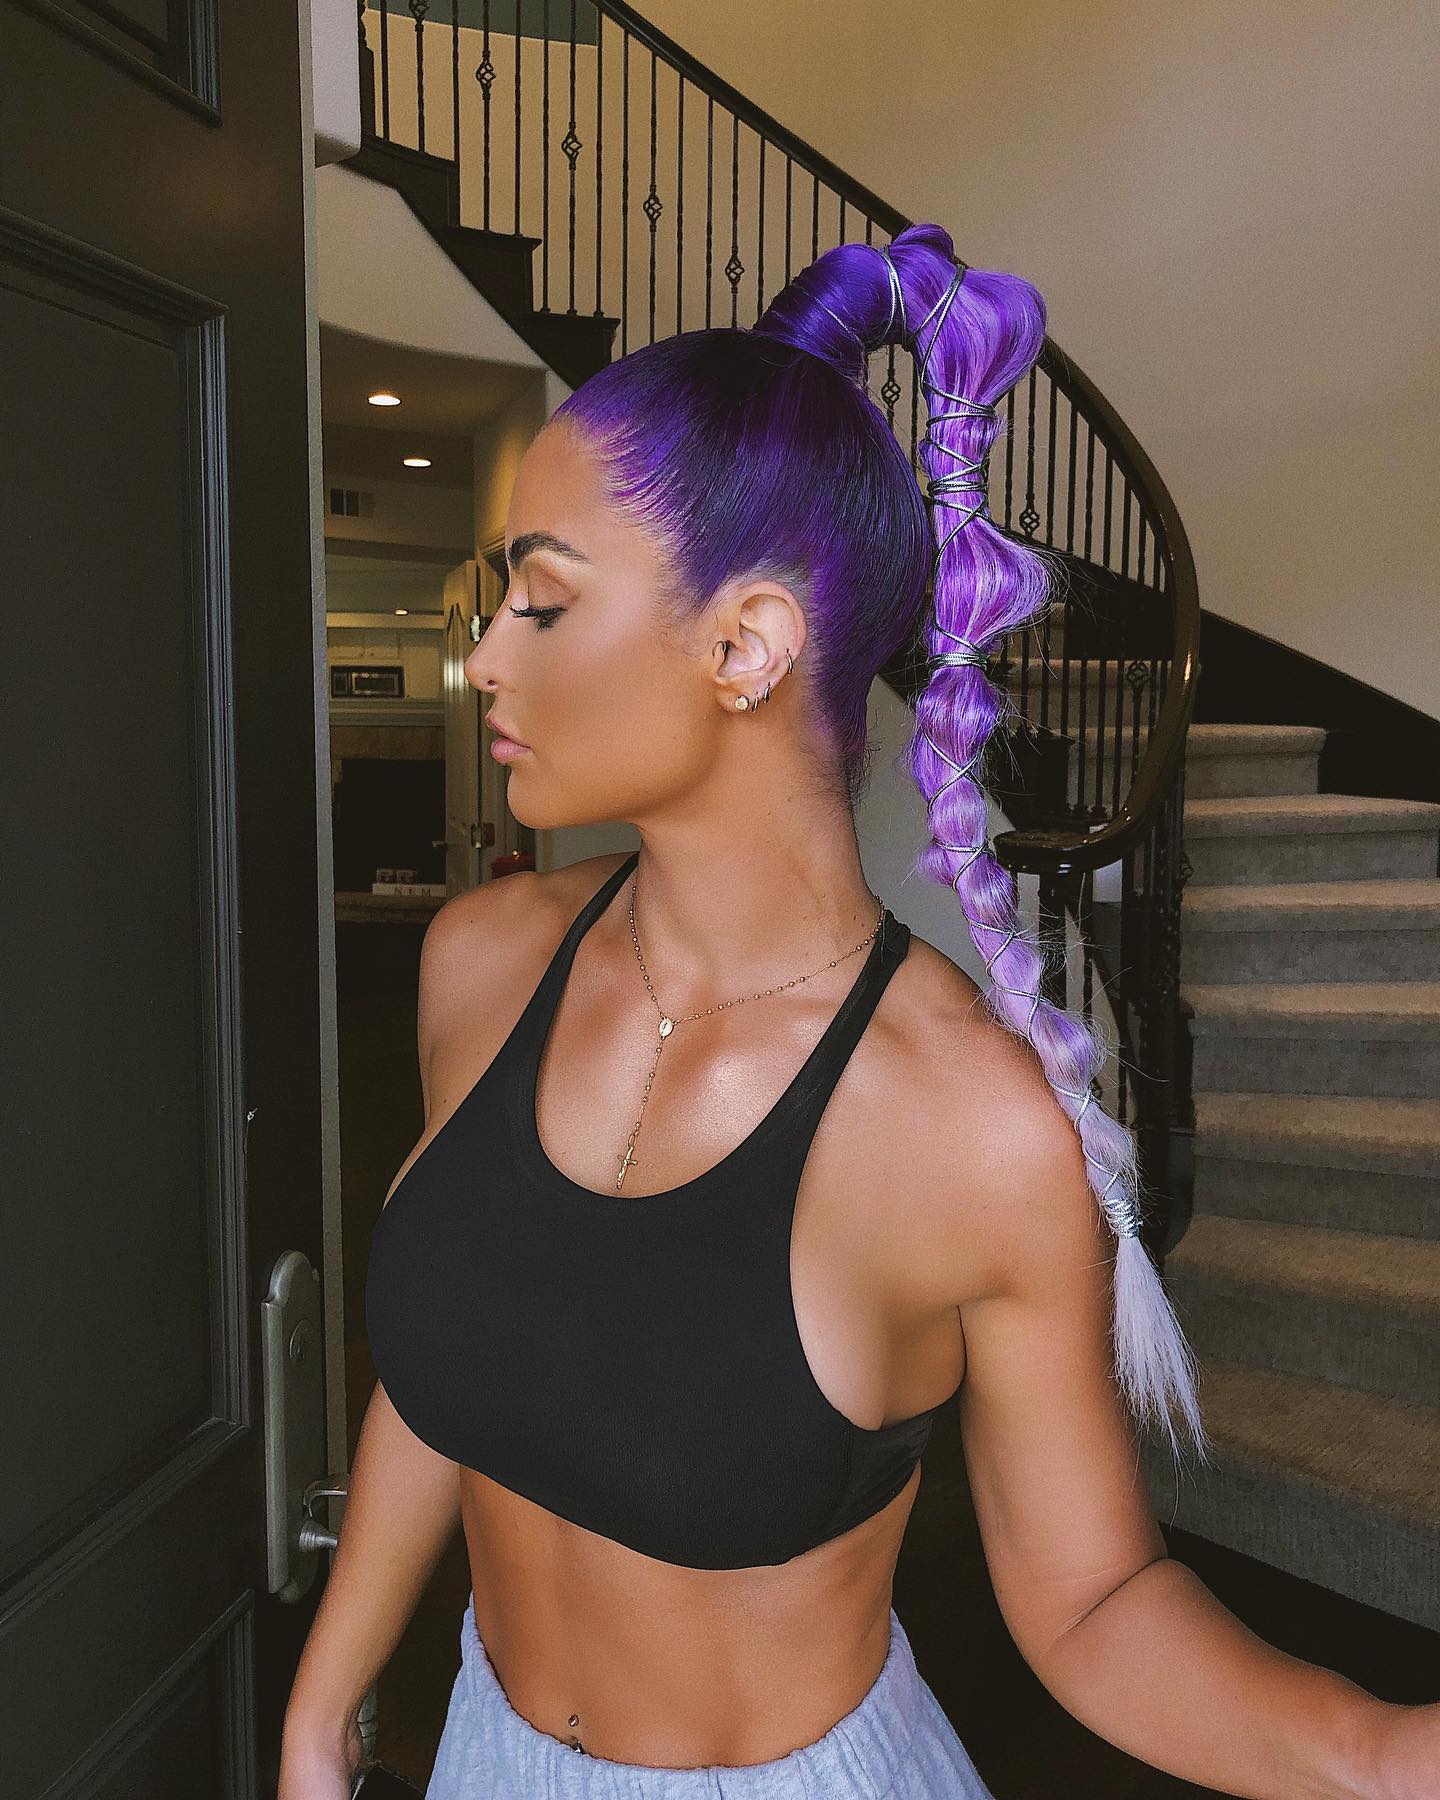 Natalie Eva Marie 2019 : Natalie Eva Marie: @natalieevamarie personal photo...